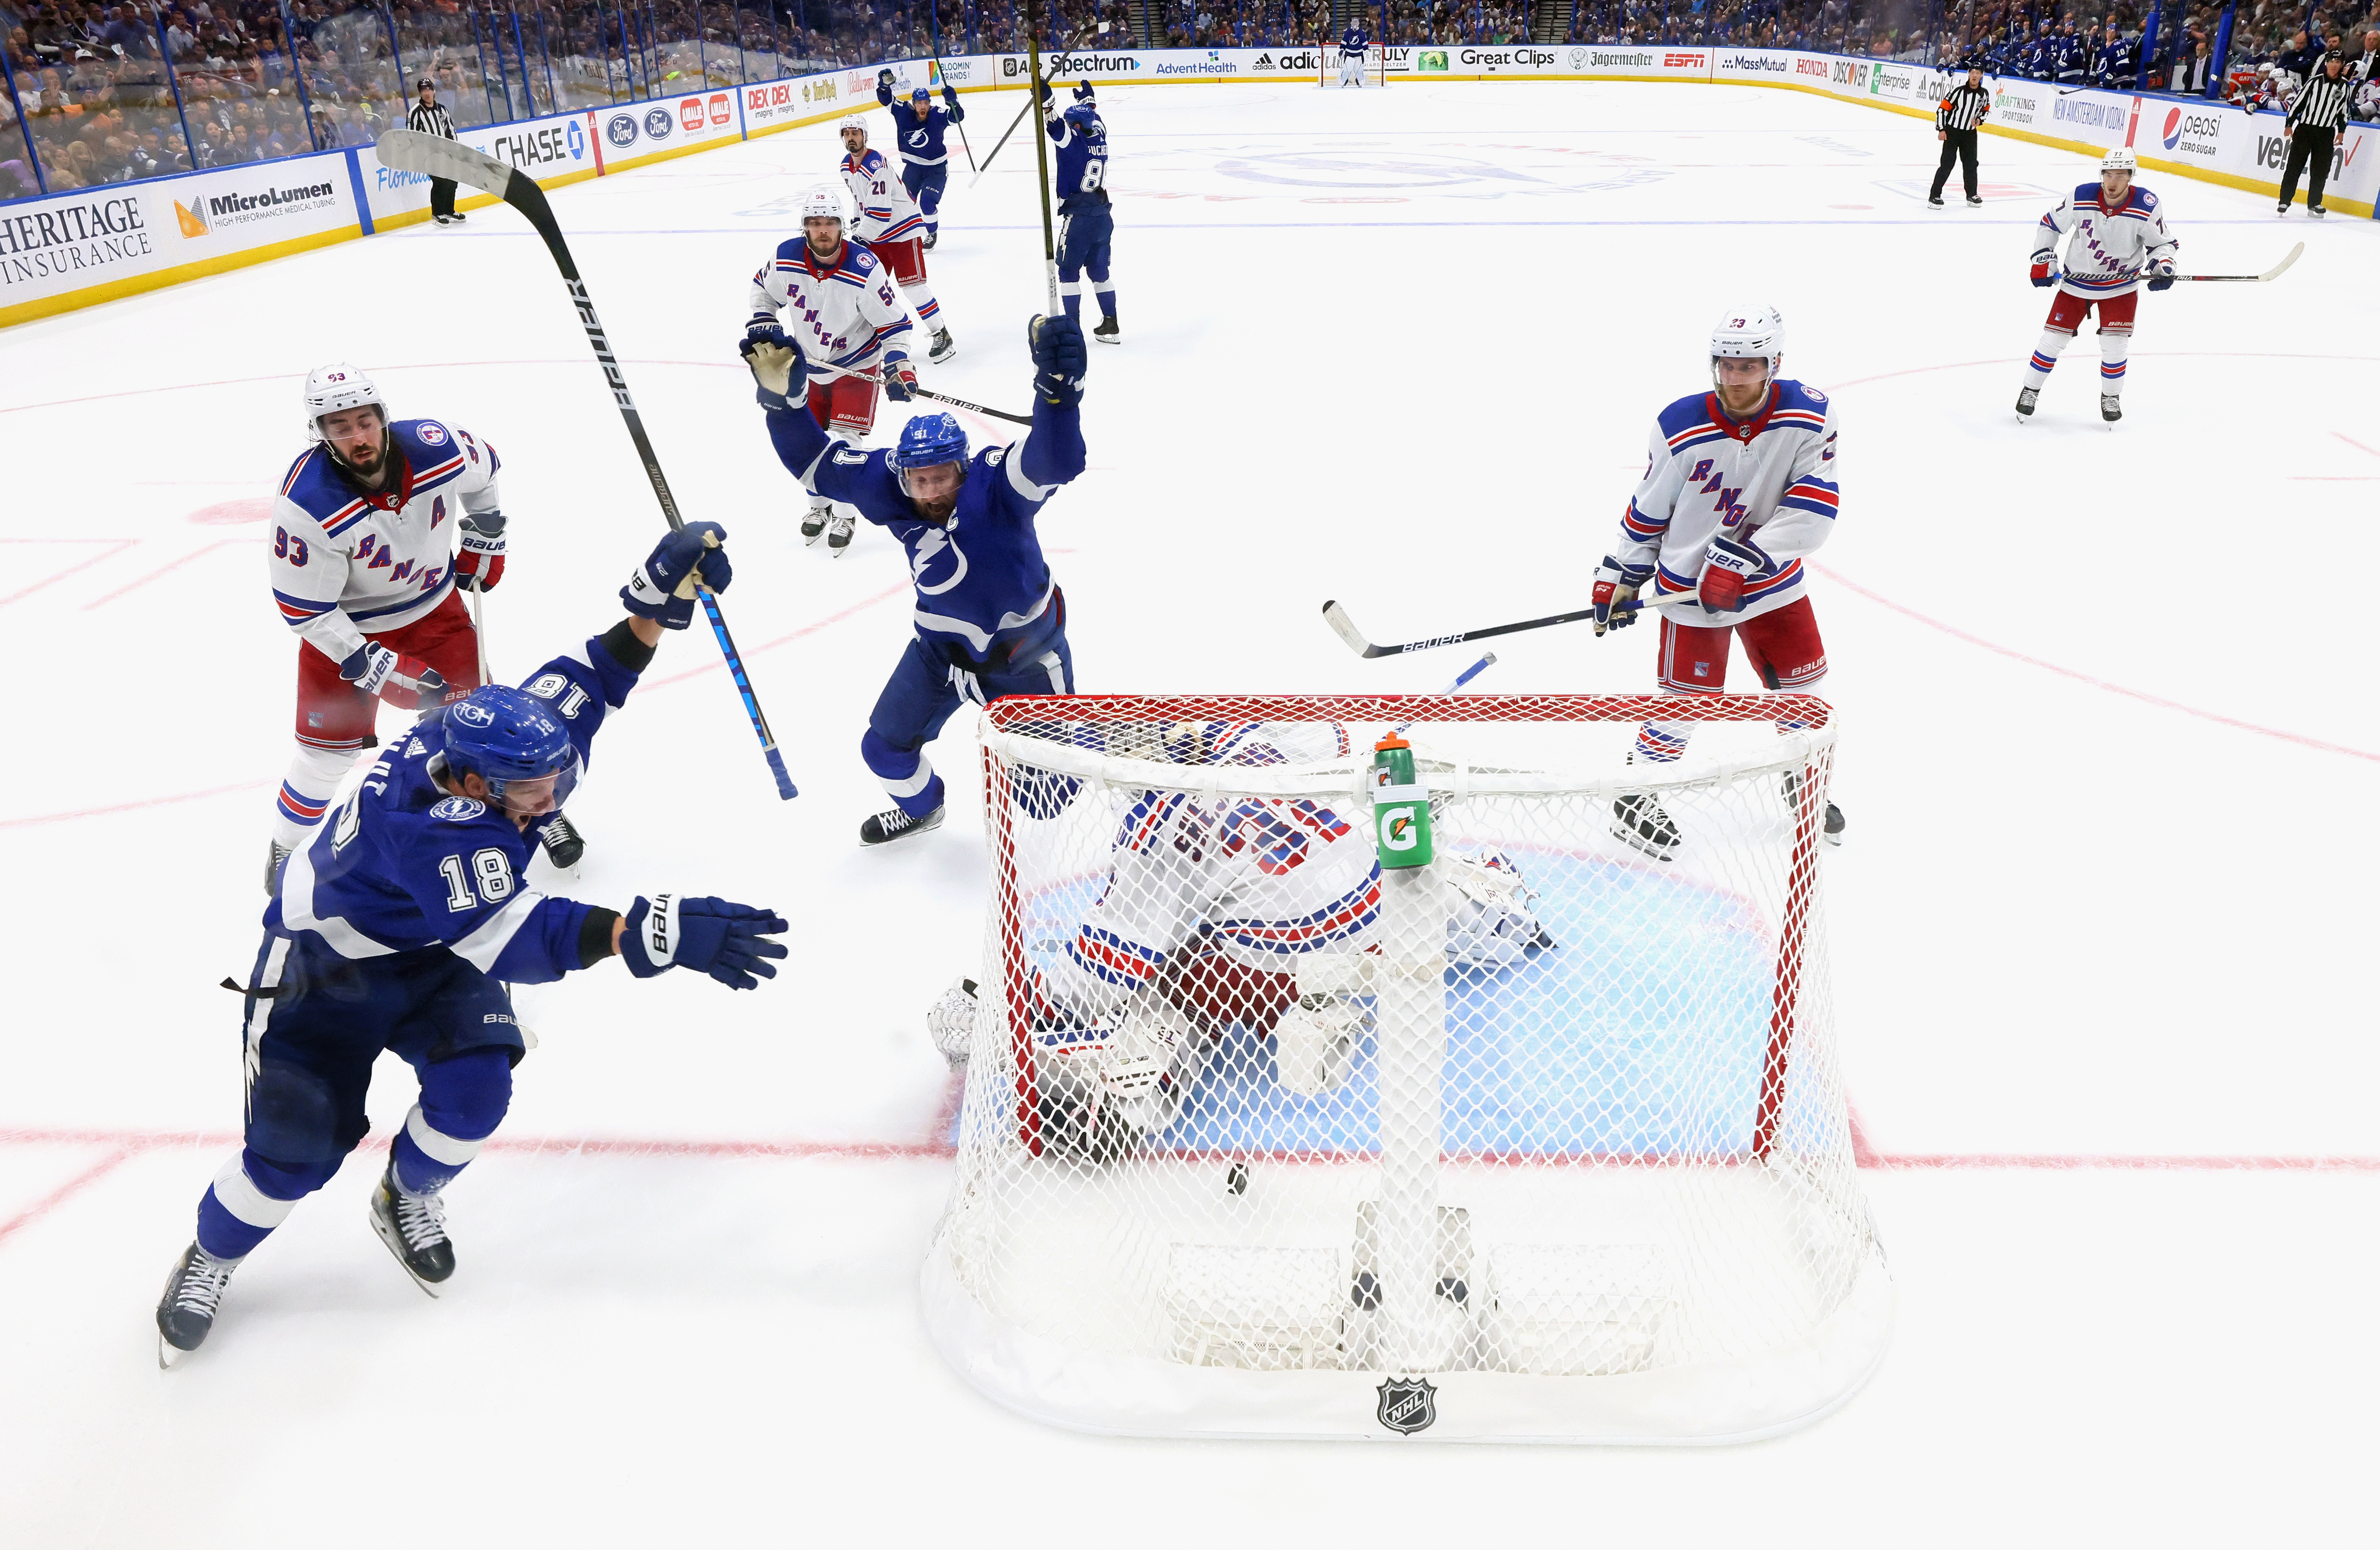 Ondrej Palat's last-minute goal gives Lightning victory in Game 3